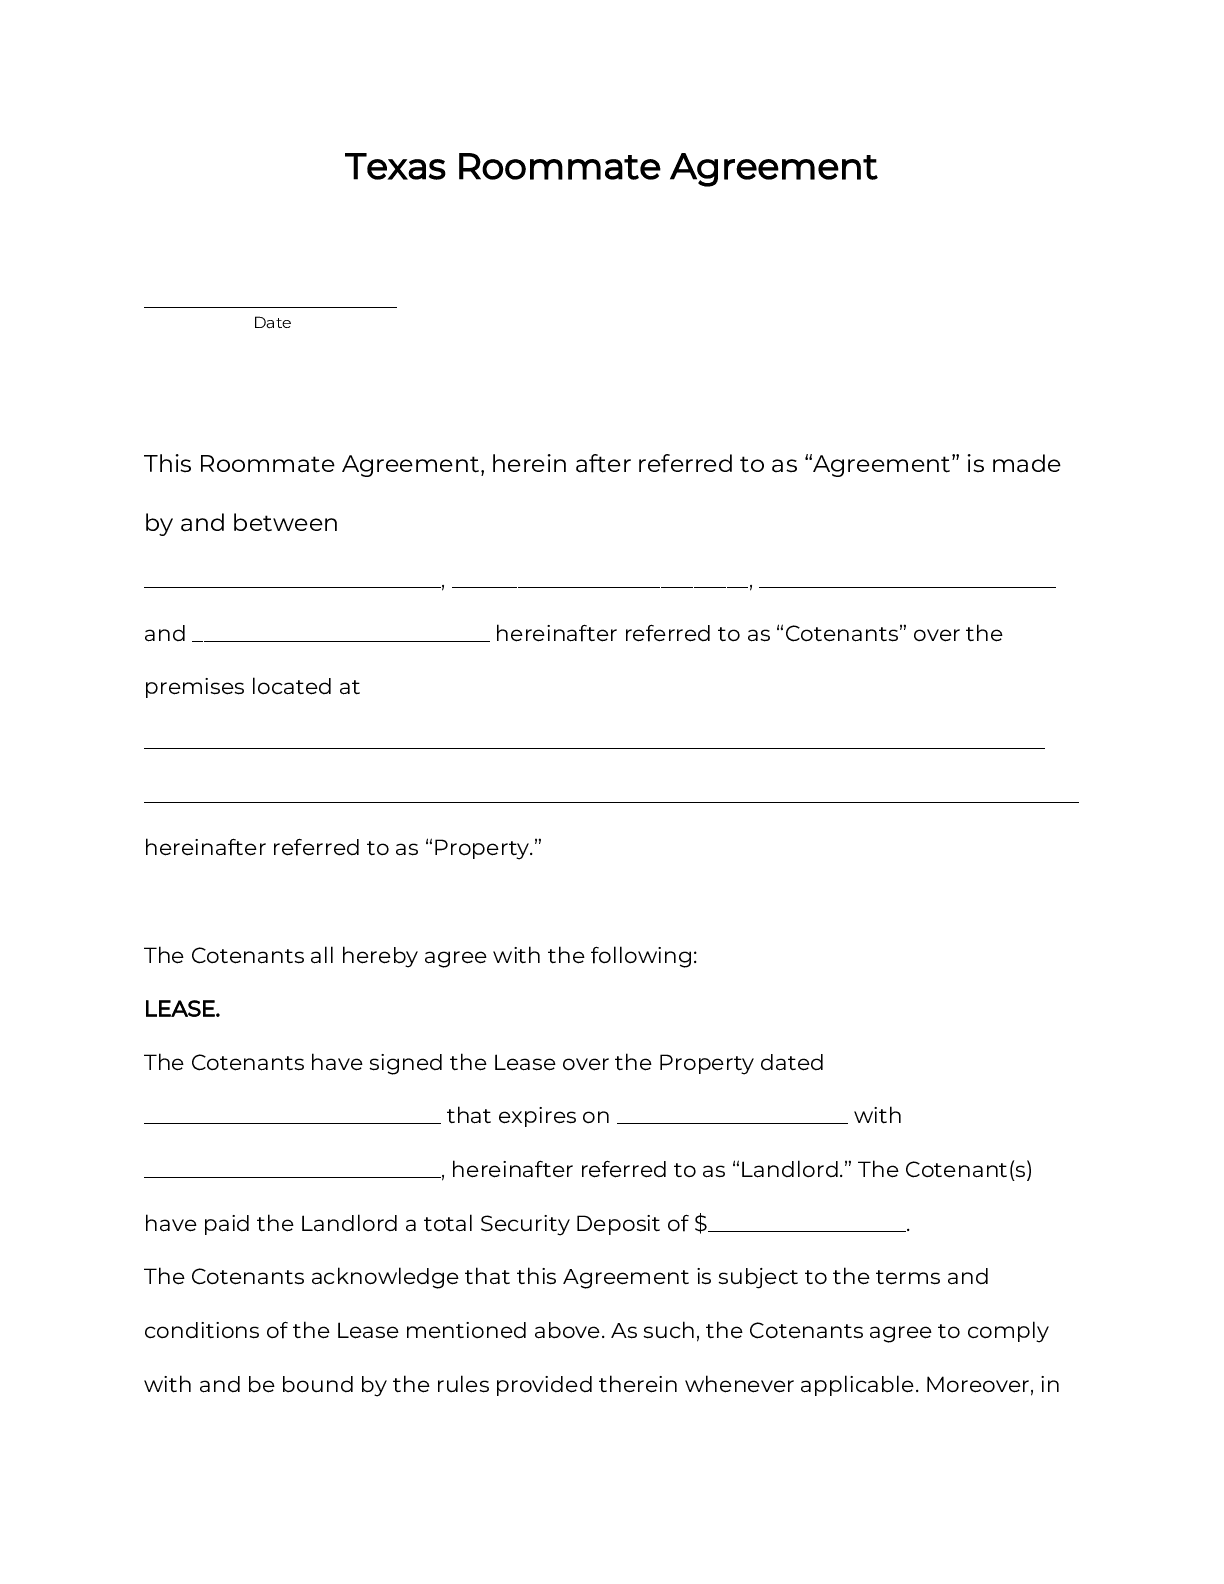 OFFICIAL Texas Room Rental Agreement: Roommate Form [22]  PDF Within simple house rental agreement template